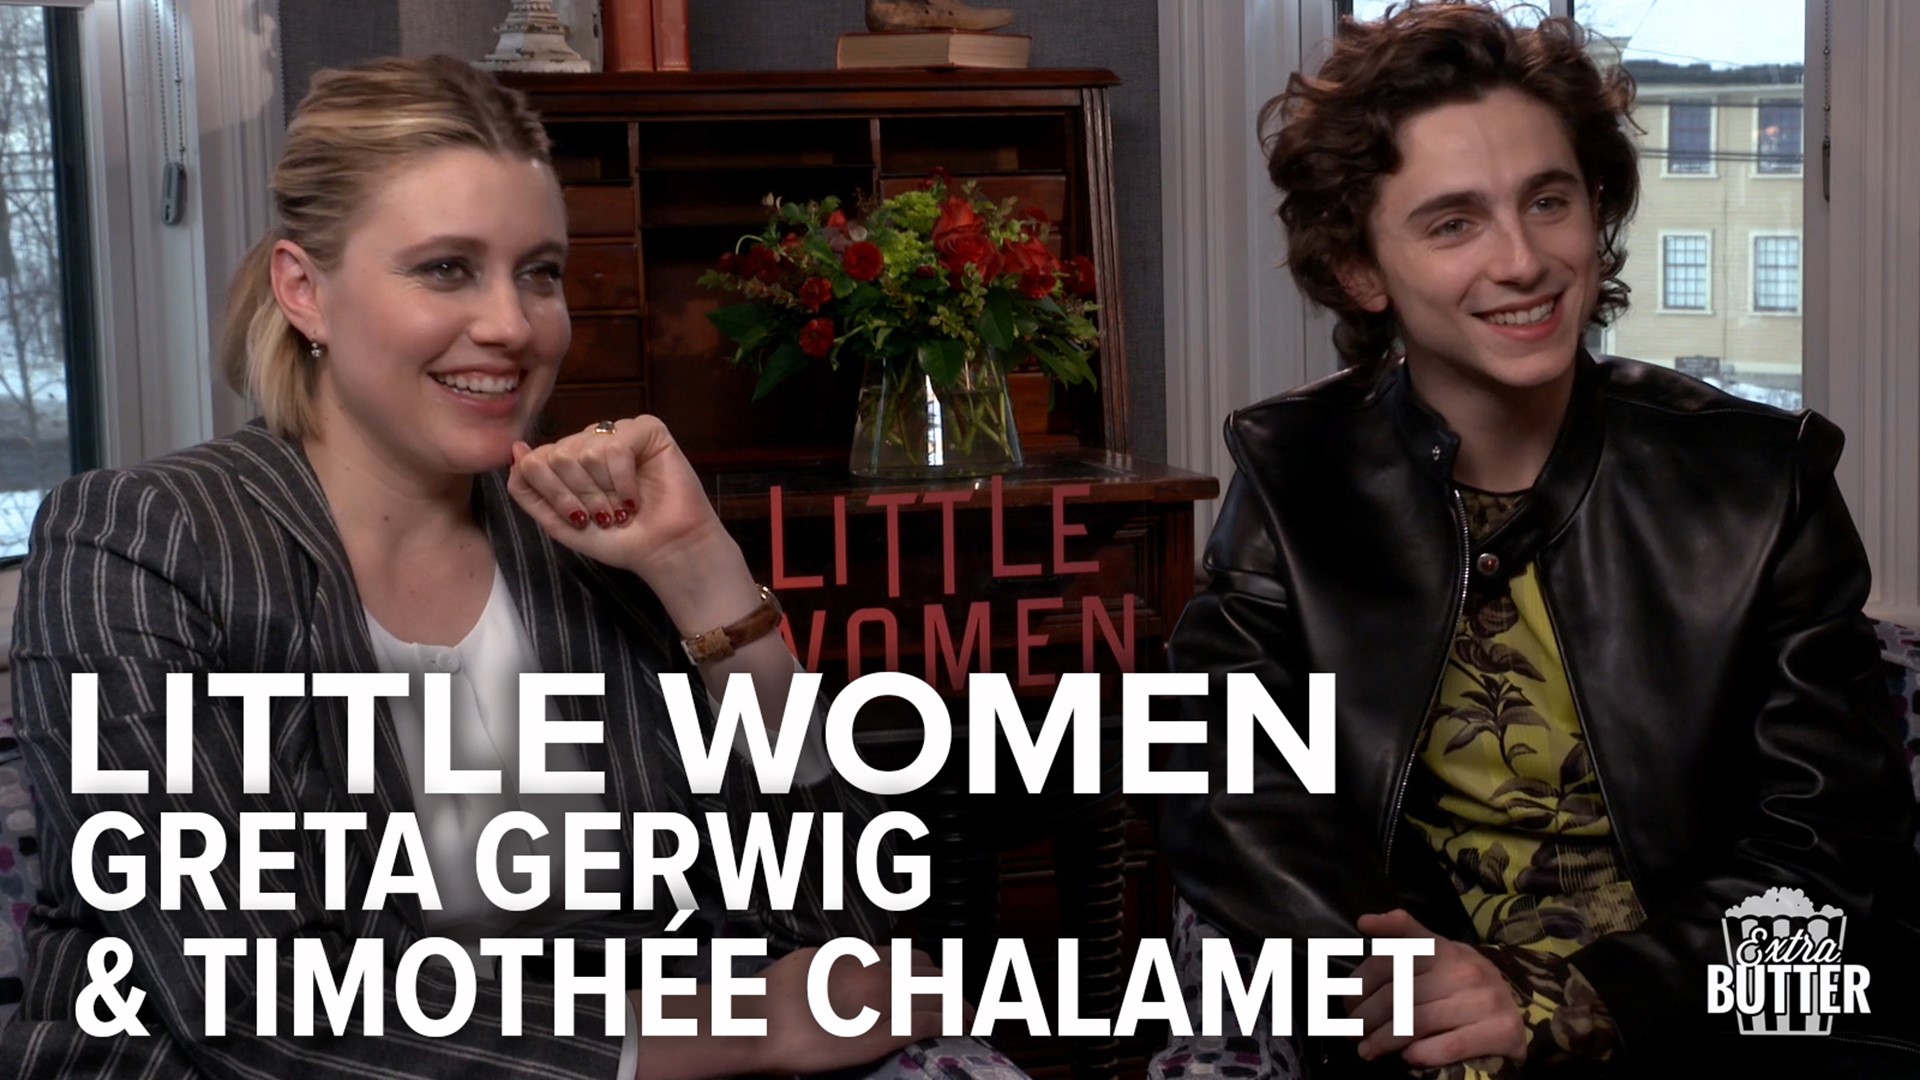 Greta Gerwig talks about what she loves about 'Little Women' and how the movie came together with so many of the same people she worked with on 'Lady Bird.'